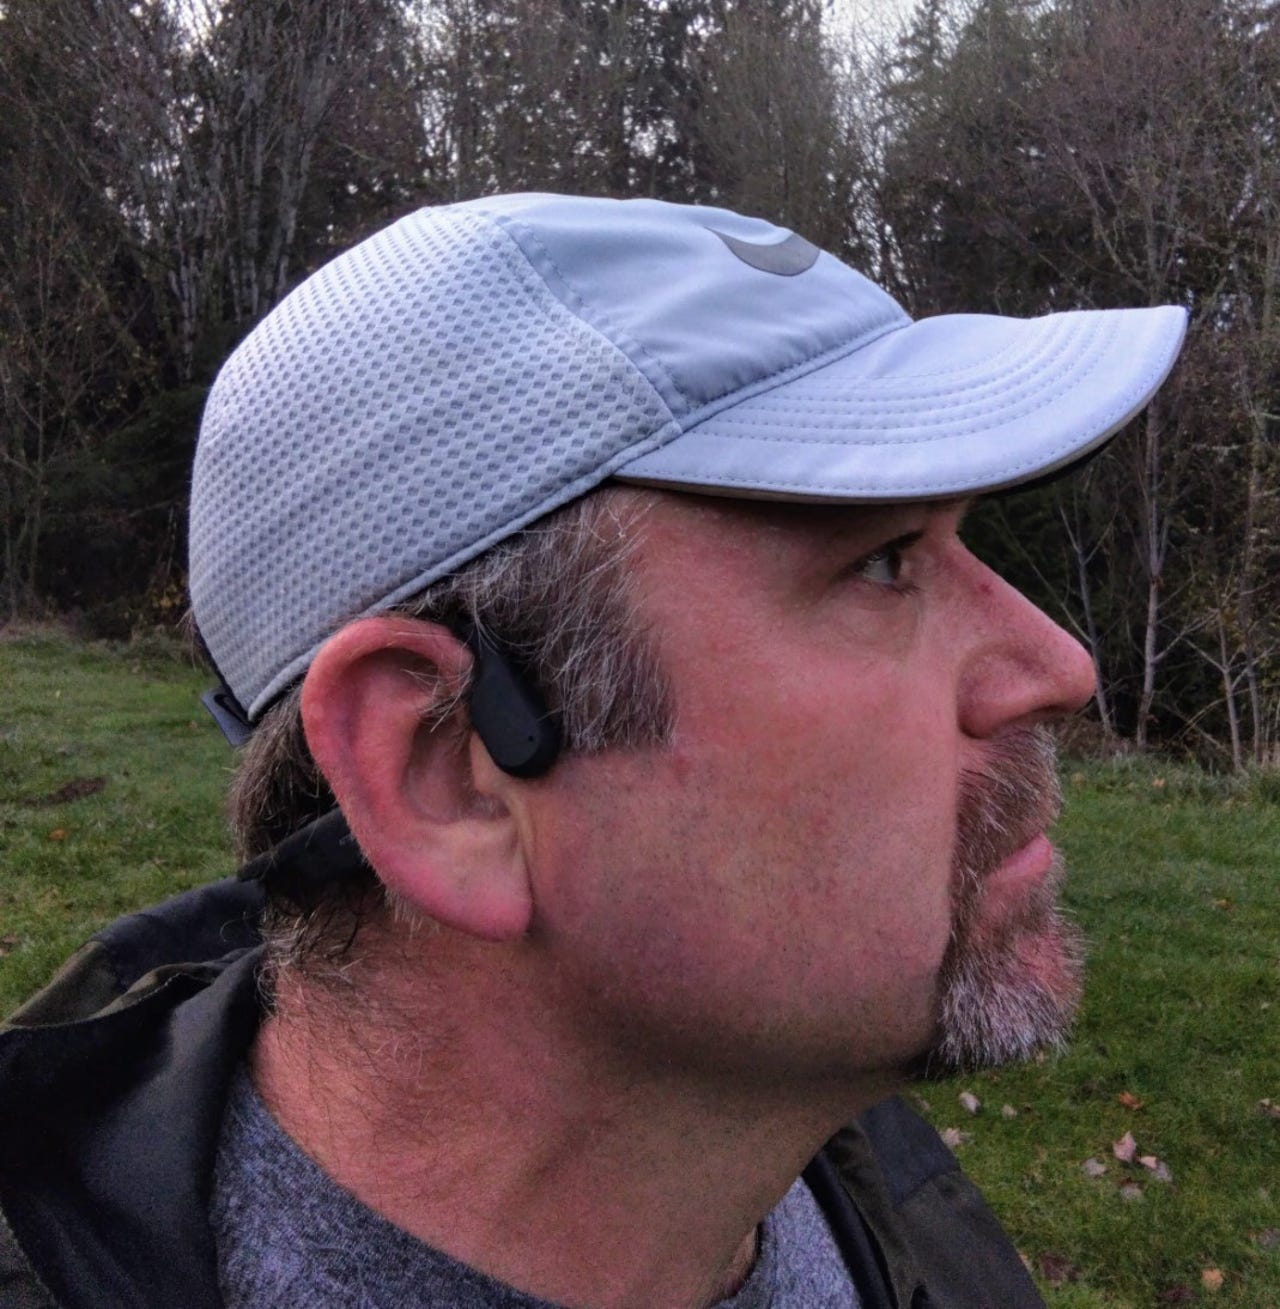 AfterShokz Aeropex review: Impressive bone conduction headset with long  battery life, solid performance